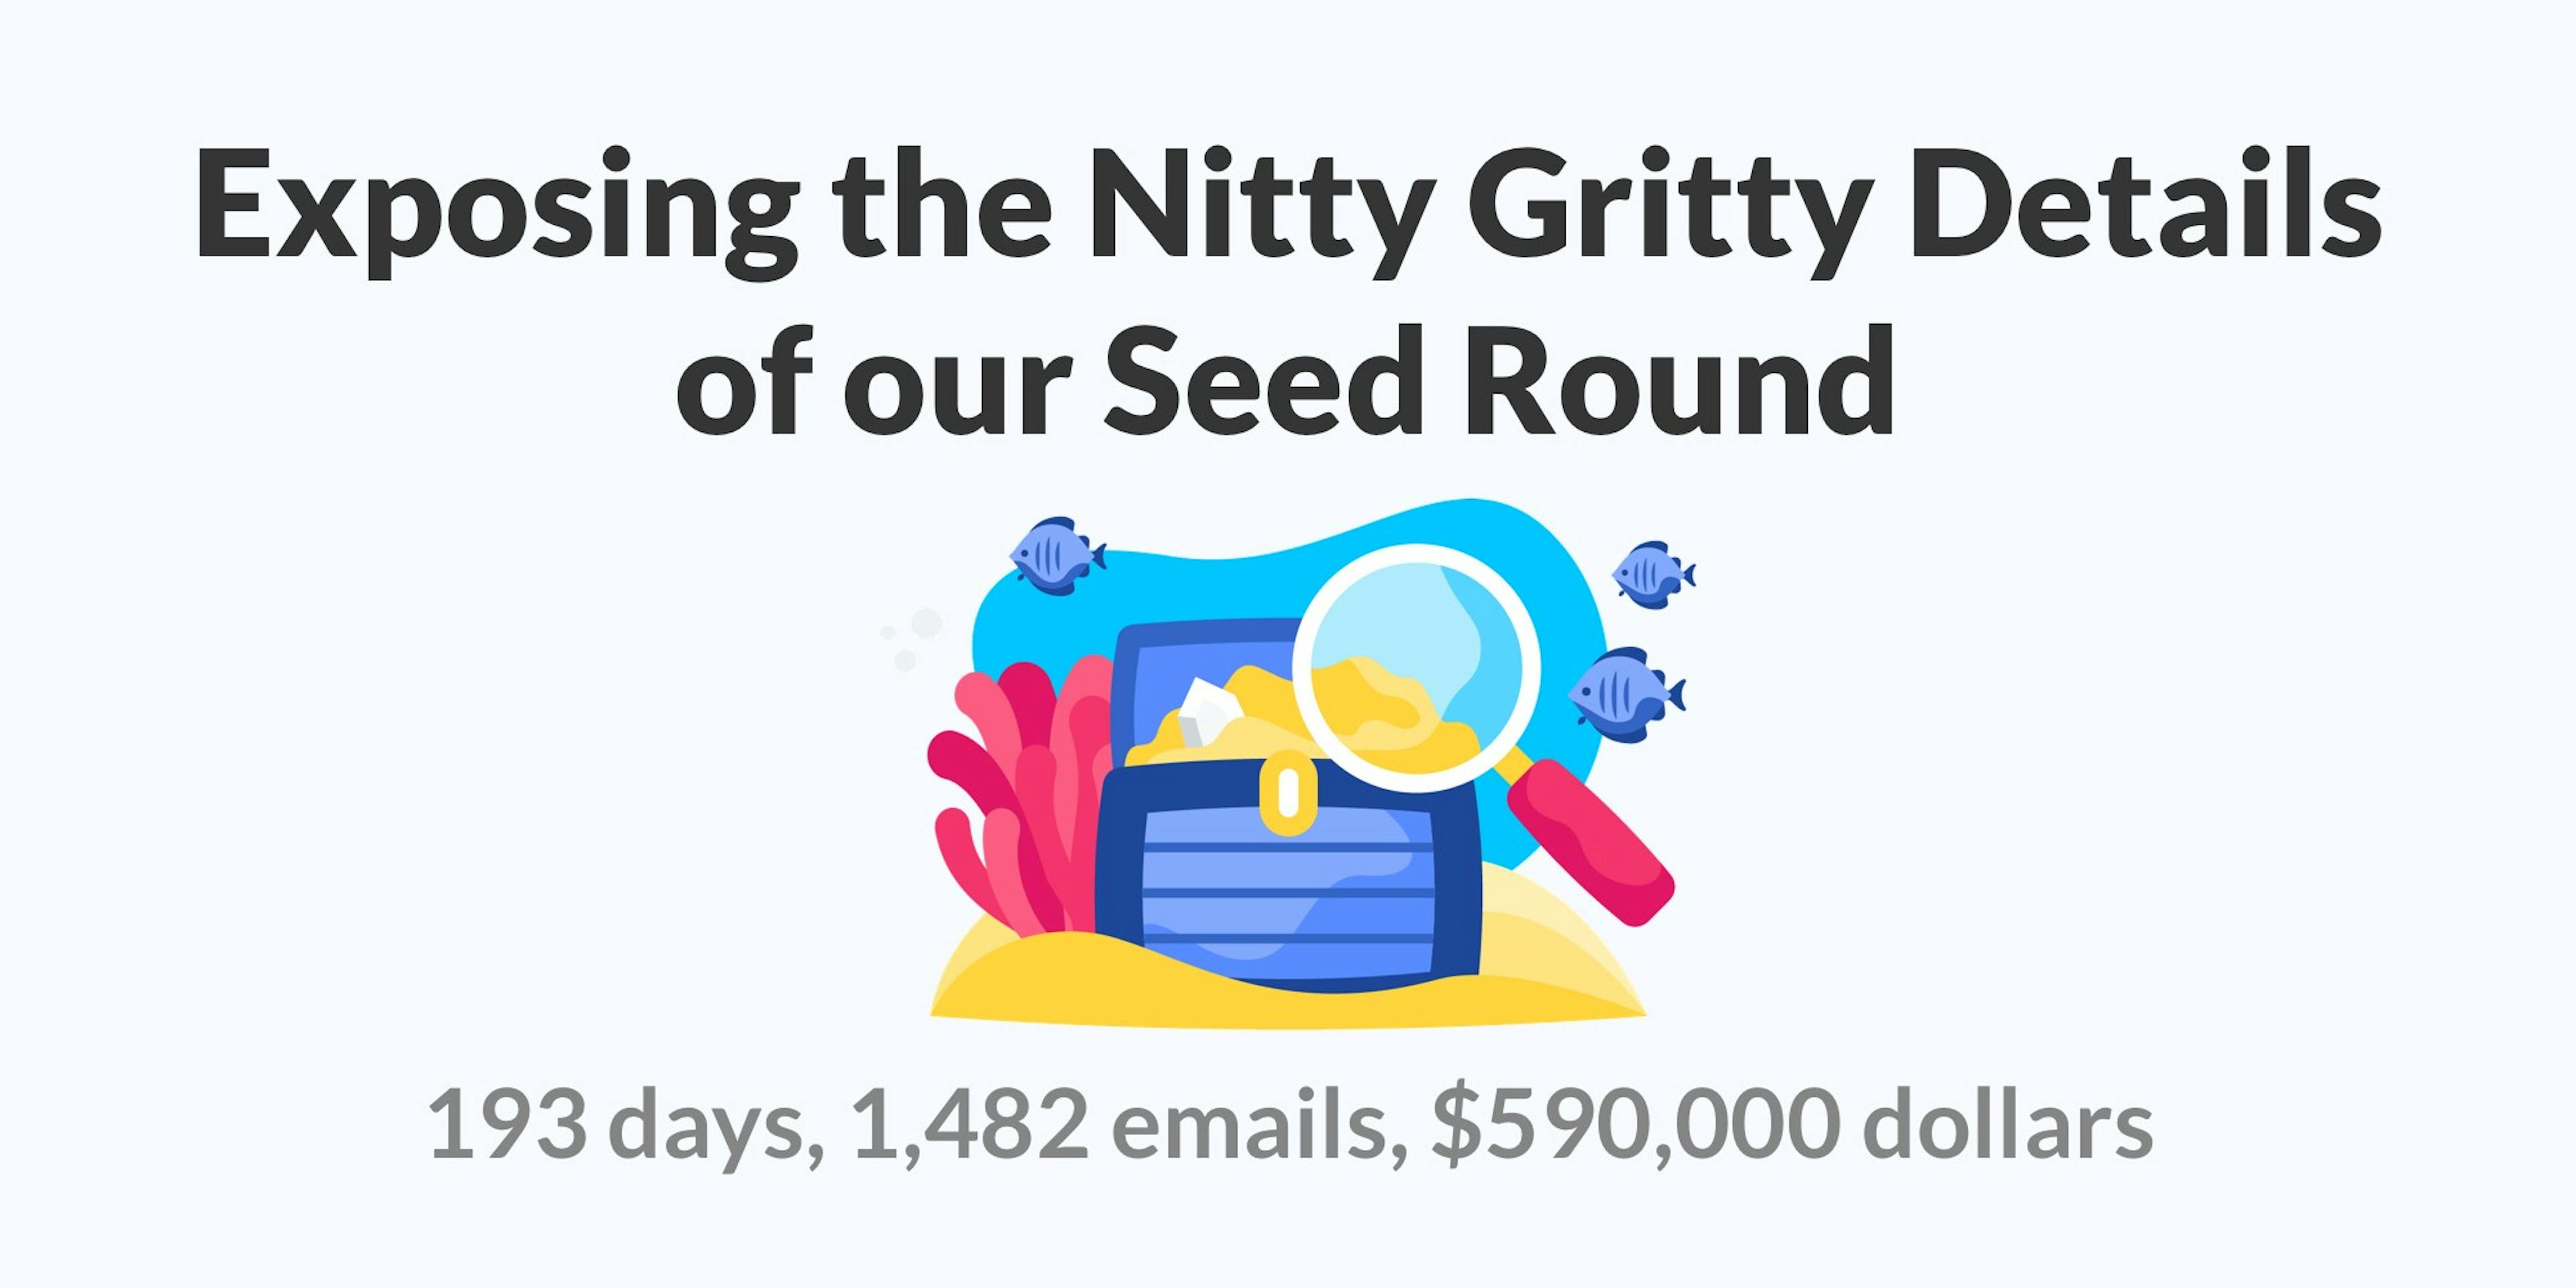 featured image - 193 days, 1,482 emails, $590,000 dollars: Exposing the Nitty Gritty Details of our Seed Round